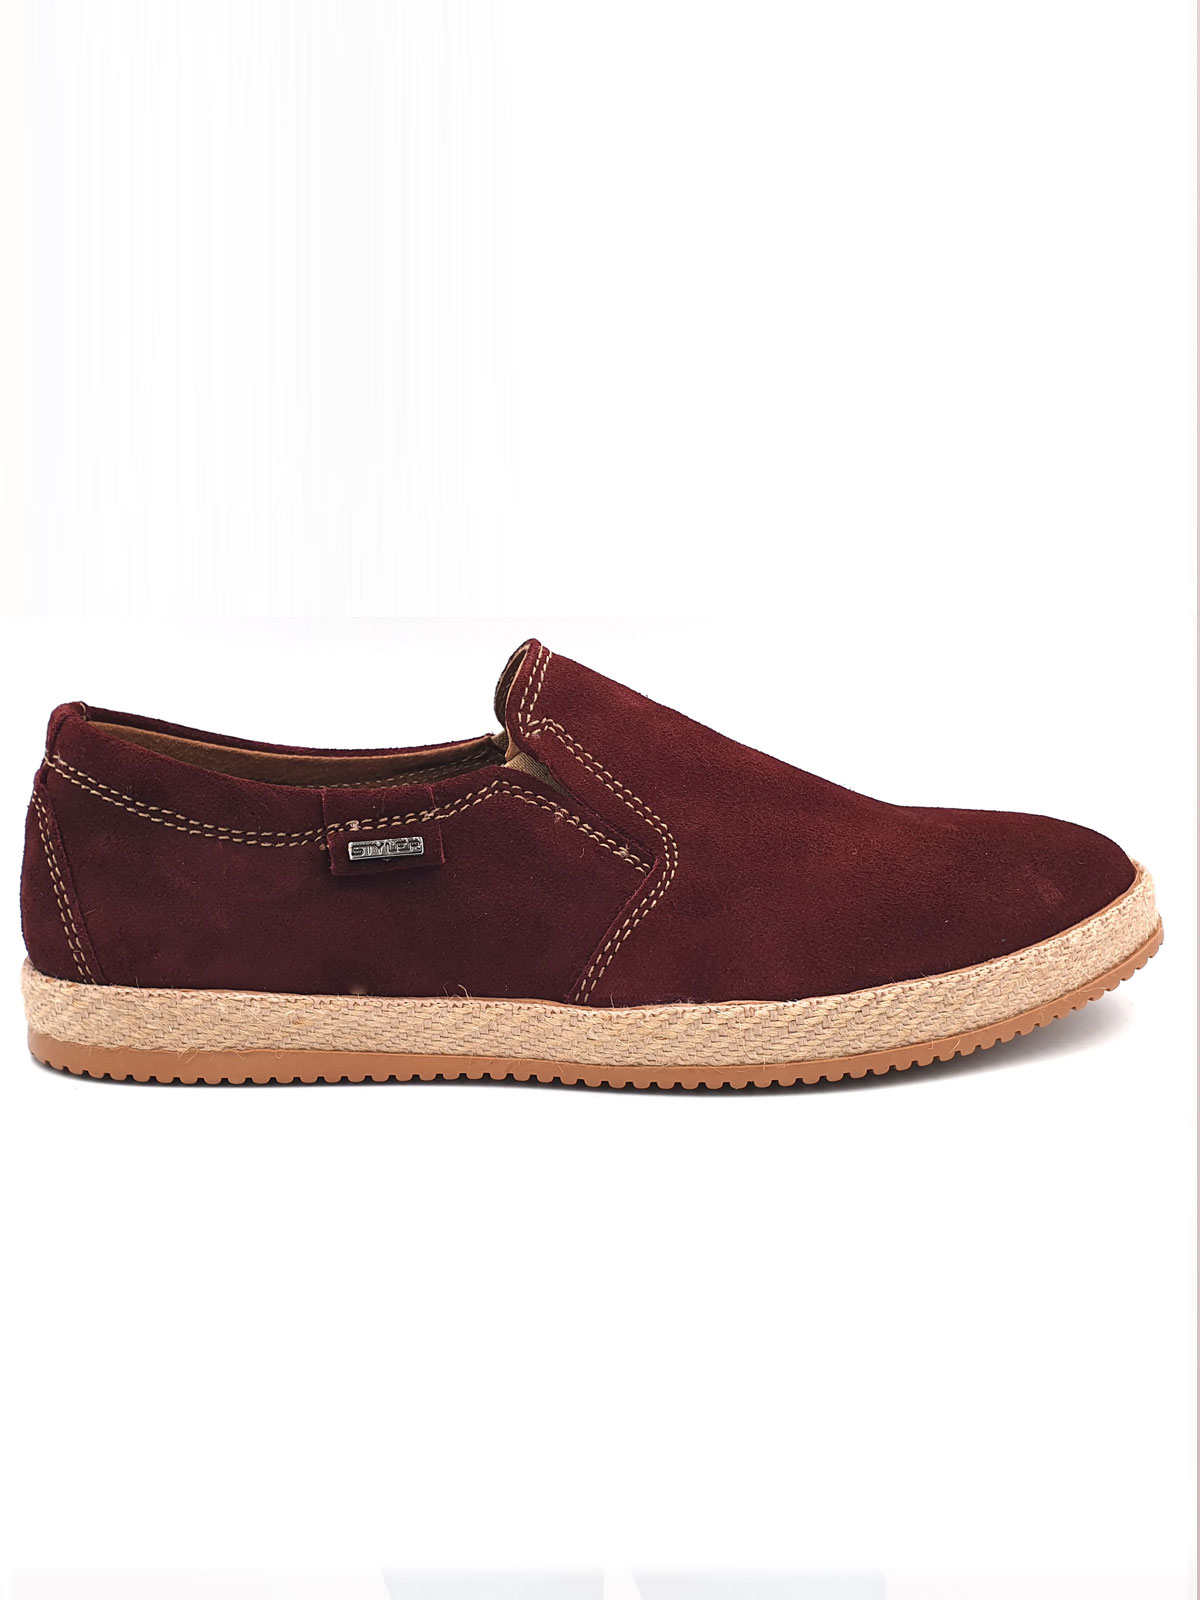 Mens shoes in burgundy color - 81102 - € 78.18 img2